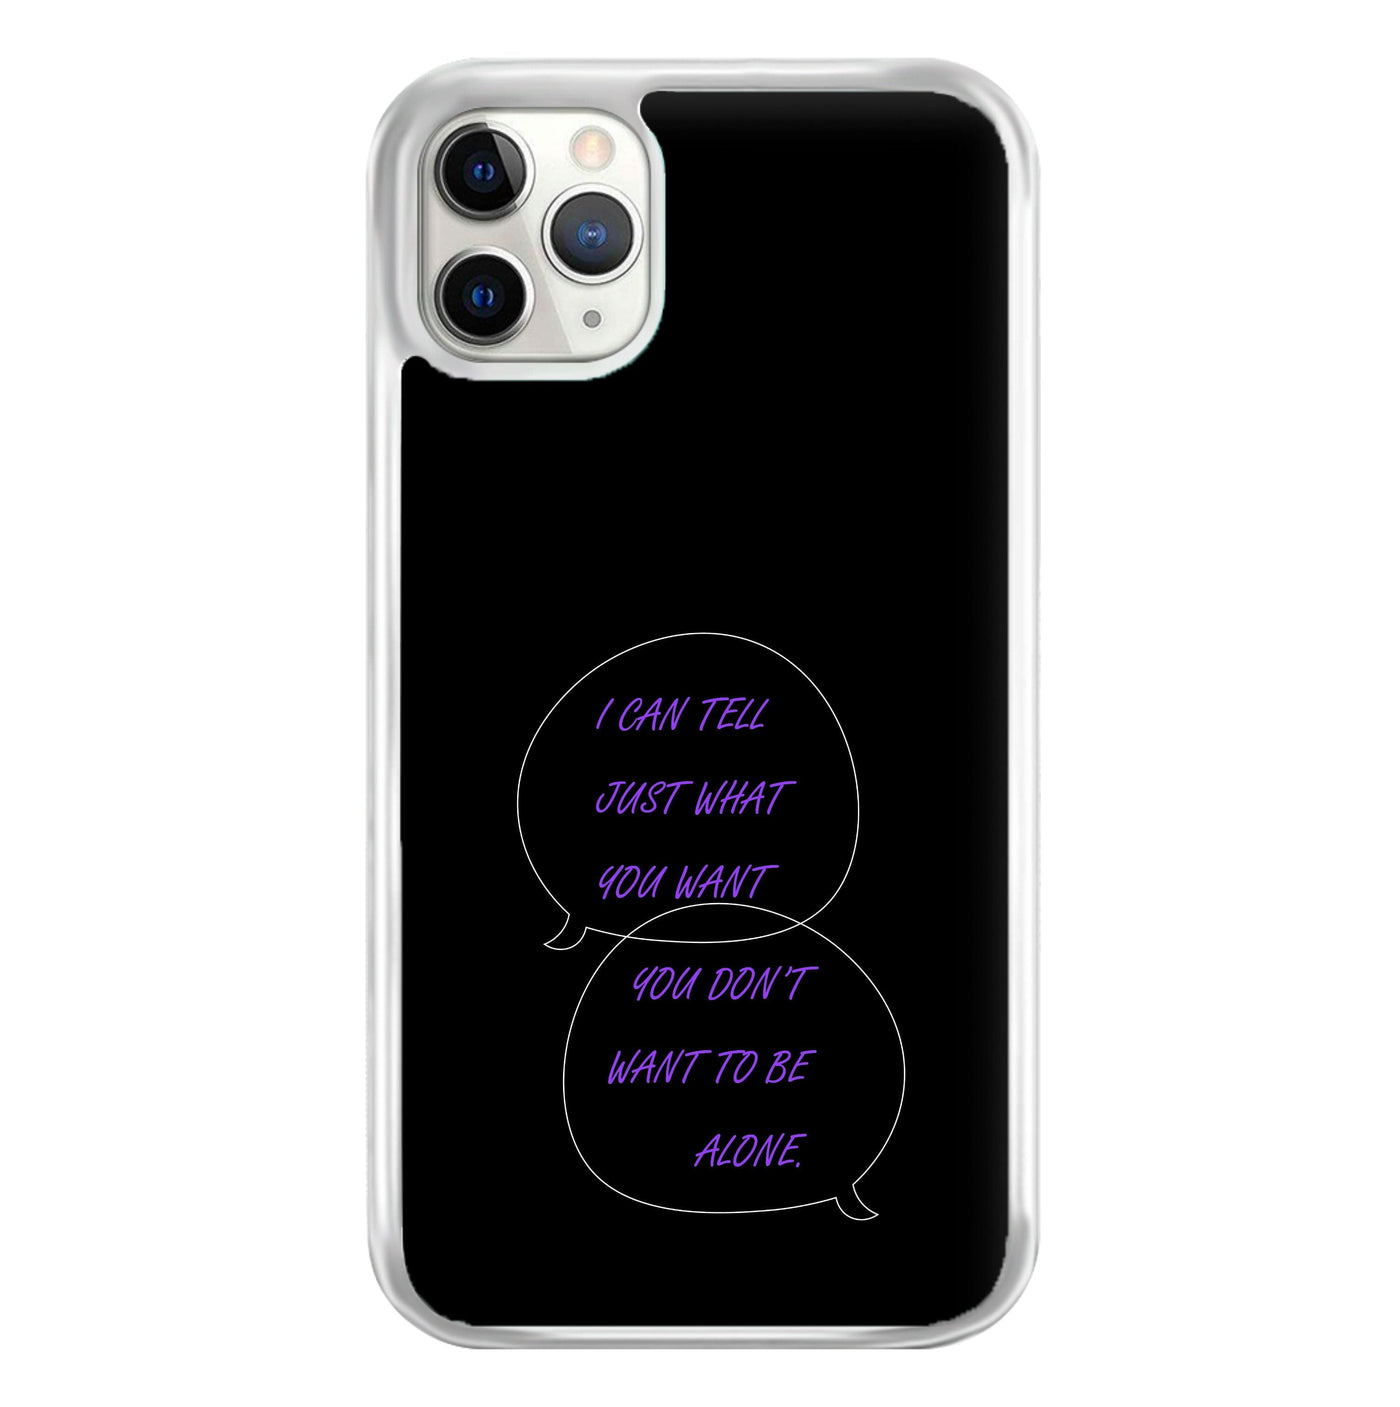 You Don't Want To Be Alone - Festival Phone Case